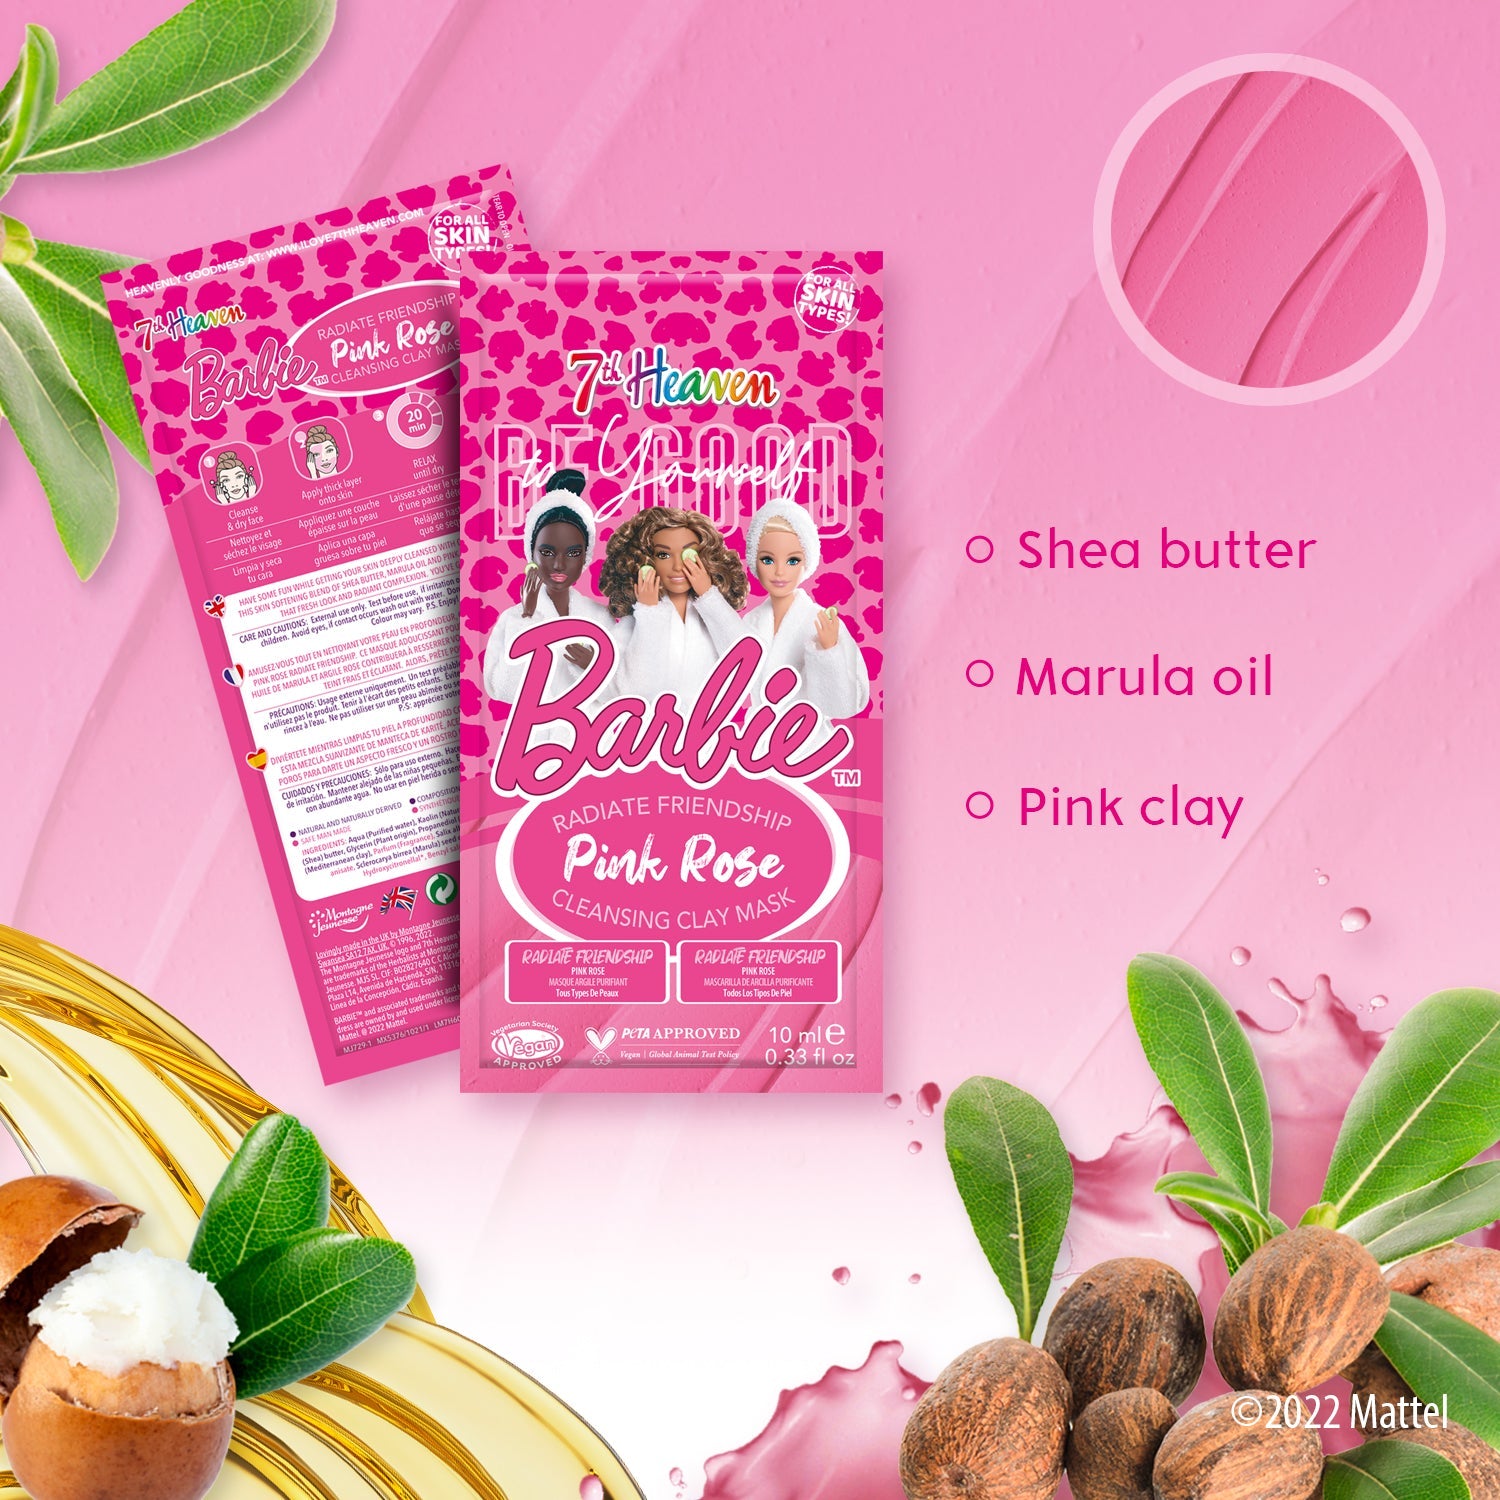 7th Heaven Barbie 'Radiate Friendship' Pink Rose Clay Mask - Creata Beauty - Professional Beauty Products